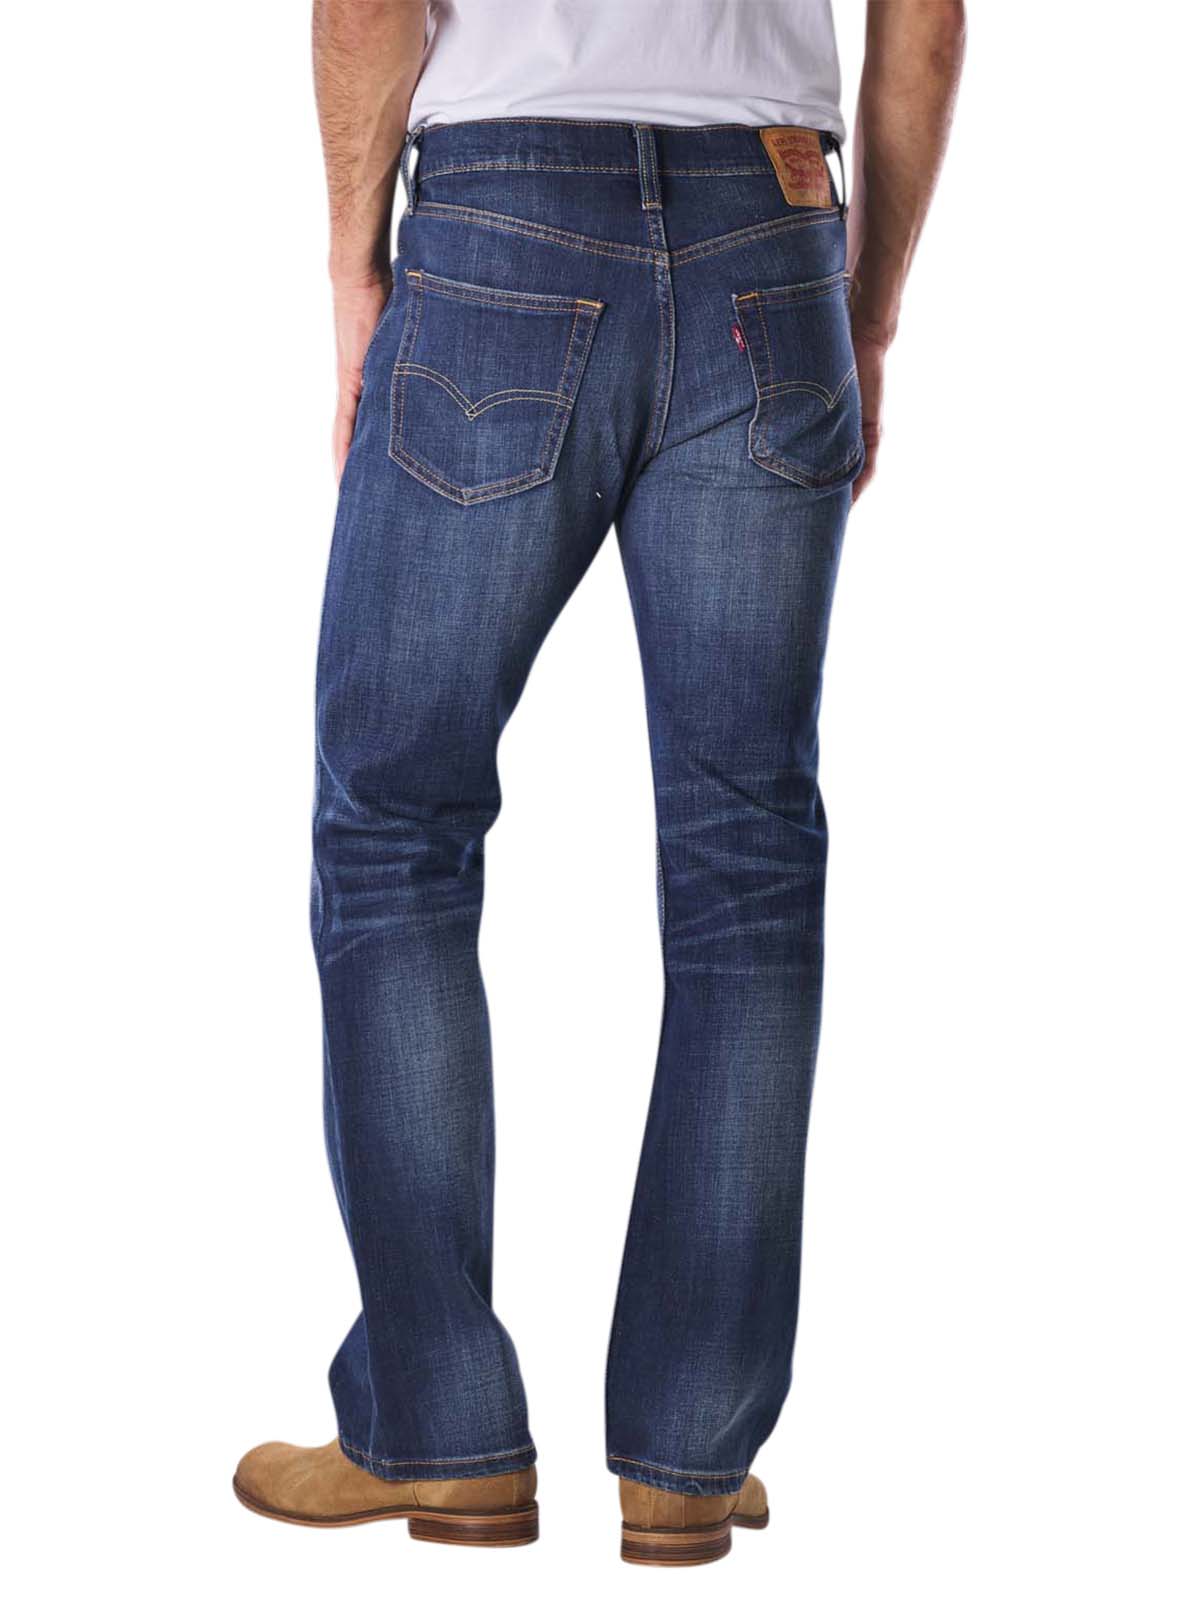 Levi's 527 Jeans Slim Bootcut wave allusion Levi's Men's Jeans | Free  Shipping on  - SIMPLY LOOK GOOD